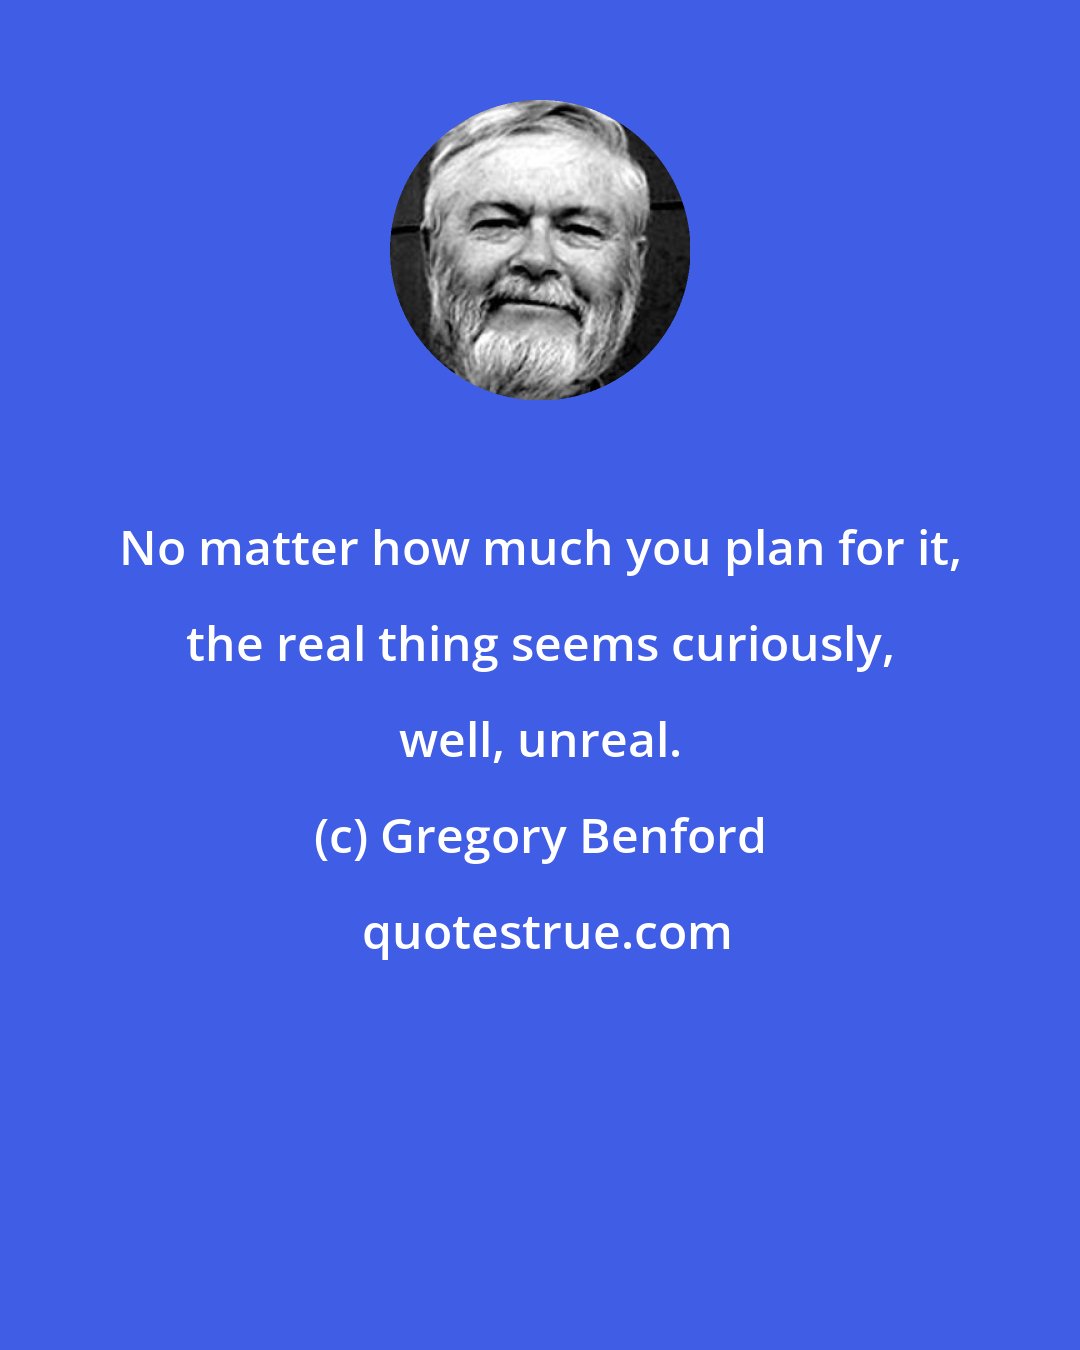 Gregory Benford: No matter how much you plan for it, the real thing seems curiously, well, unreal.